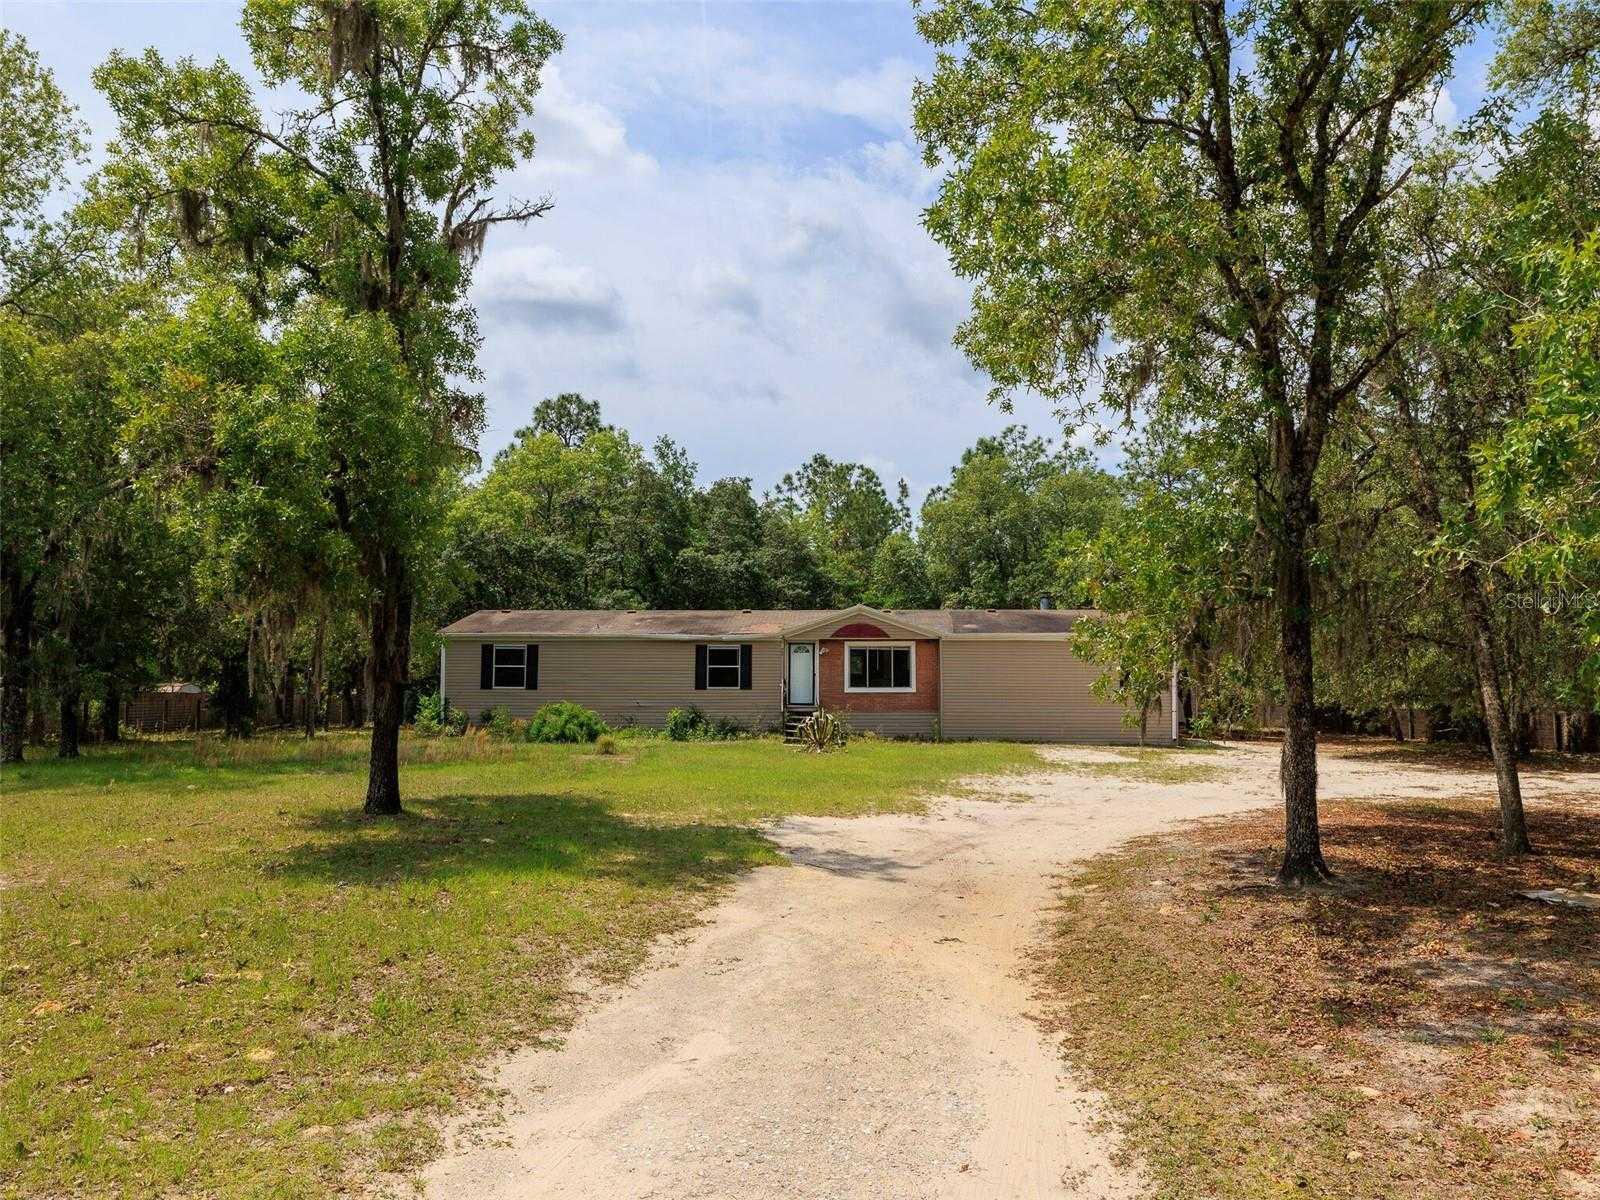 18680 44TH, DUNNELLON, Manufactured Home - Post 1977,  for sale, Melissa & Jon Lebron, Ocala Realty World - Selling All of Florida